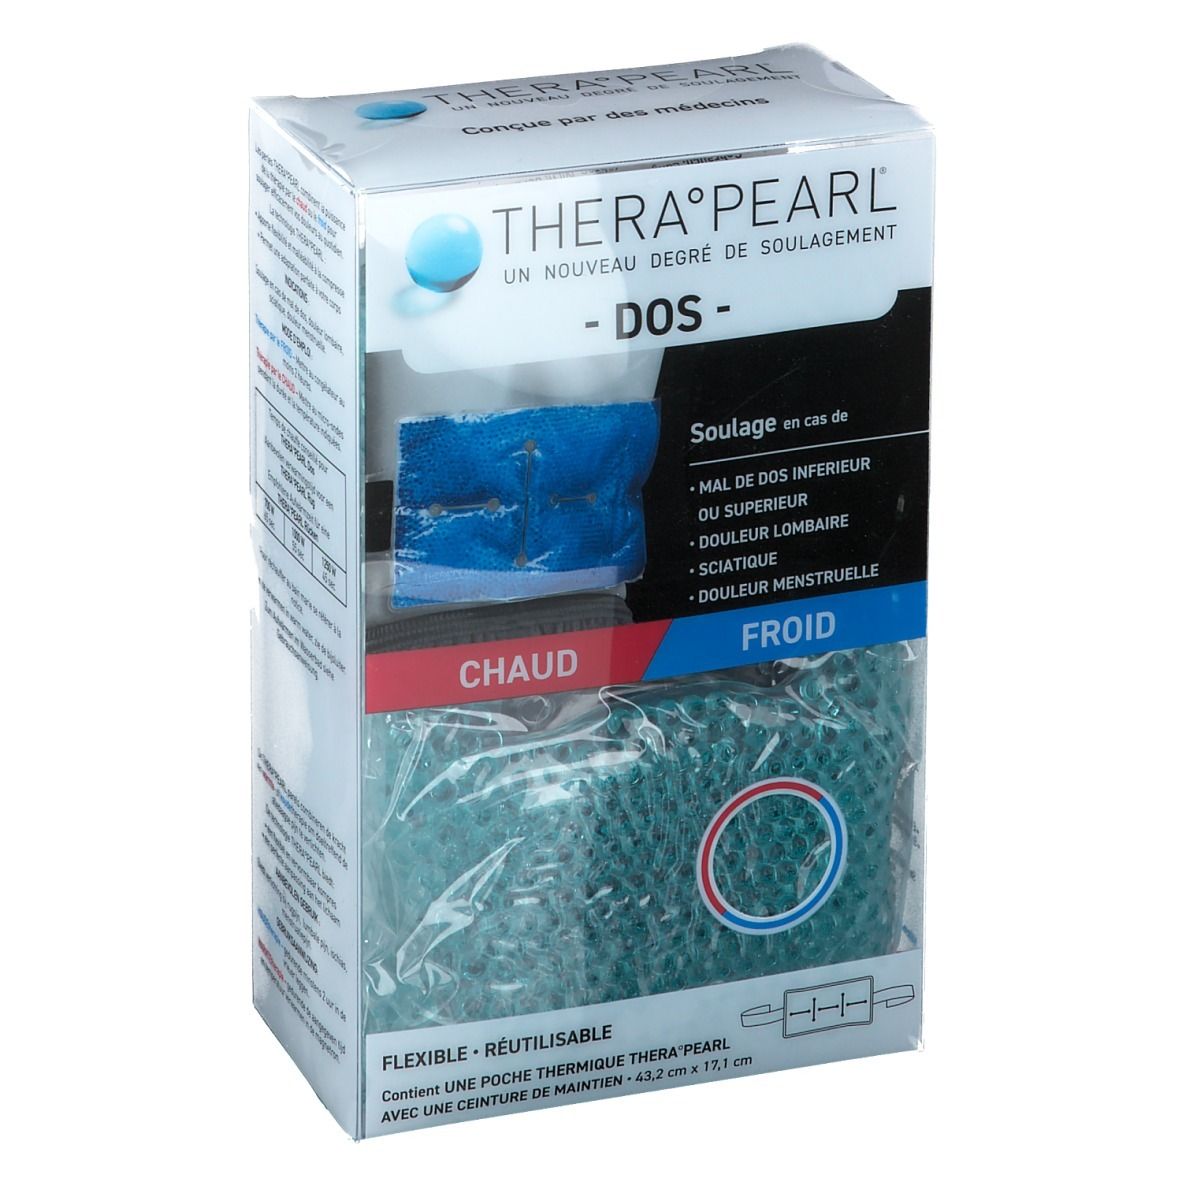 TheraPearl compresse chaud froid dos